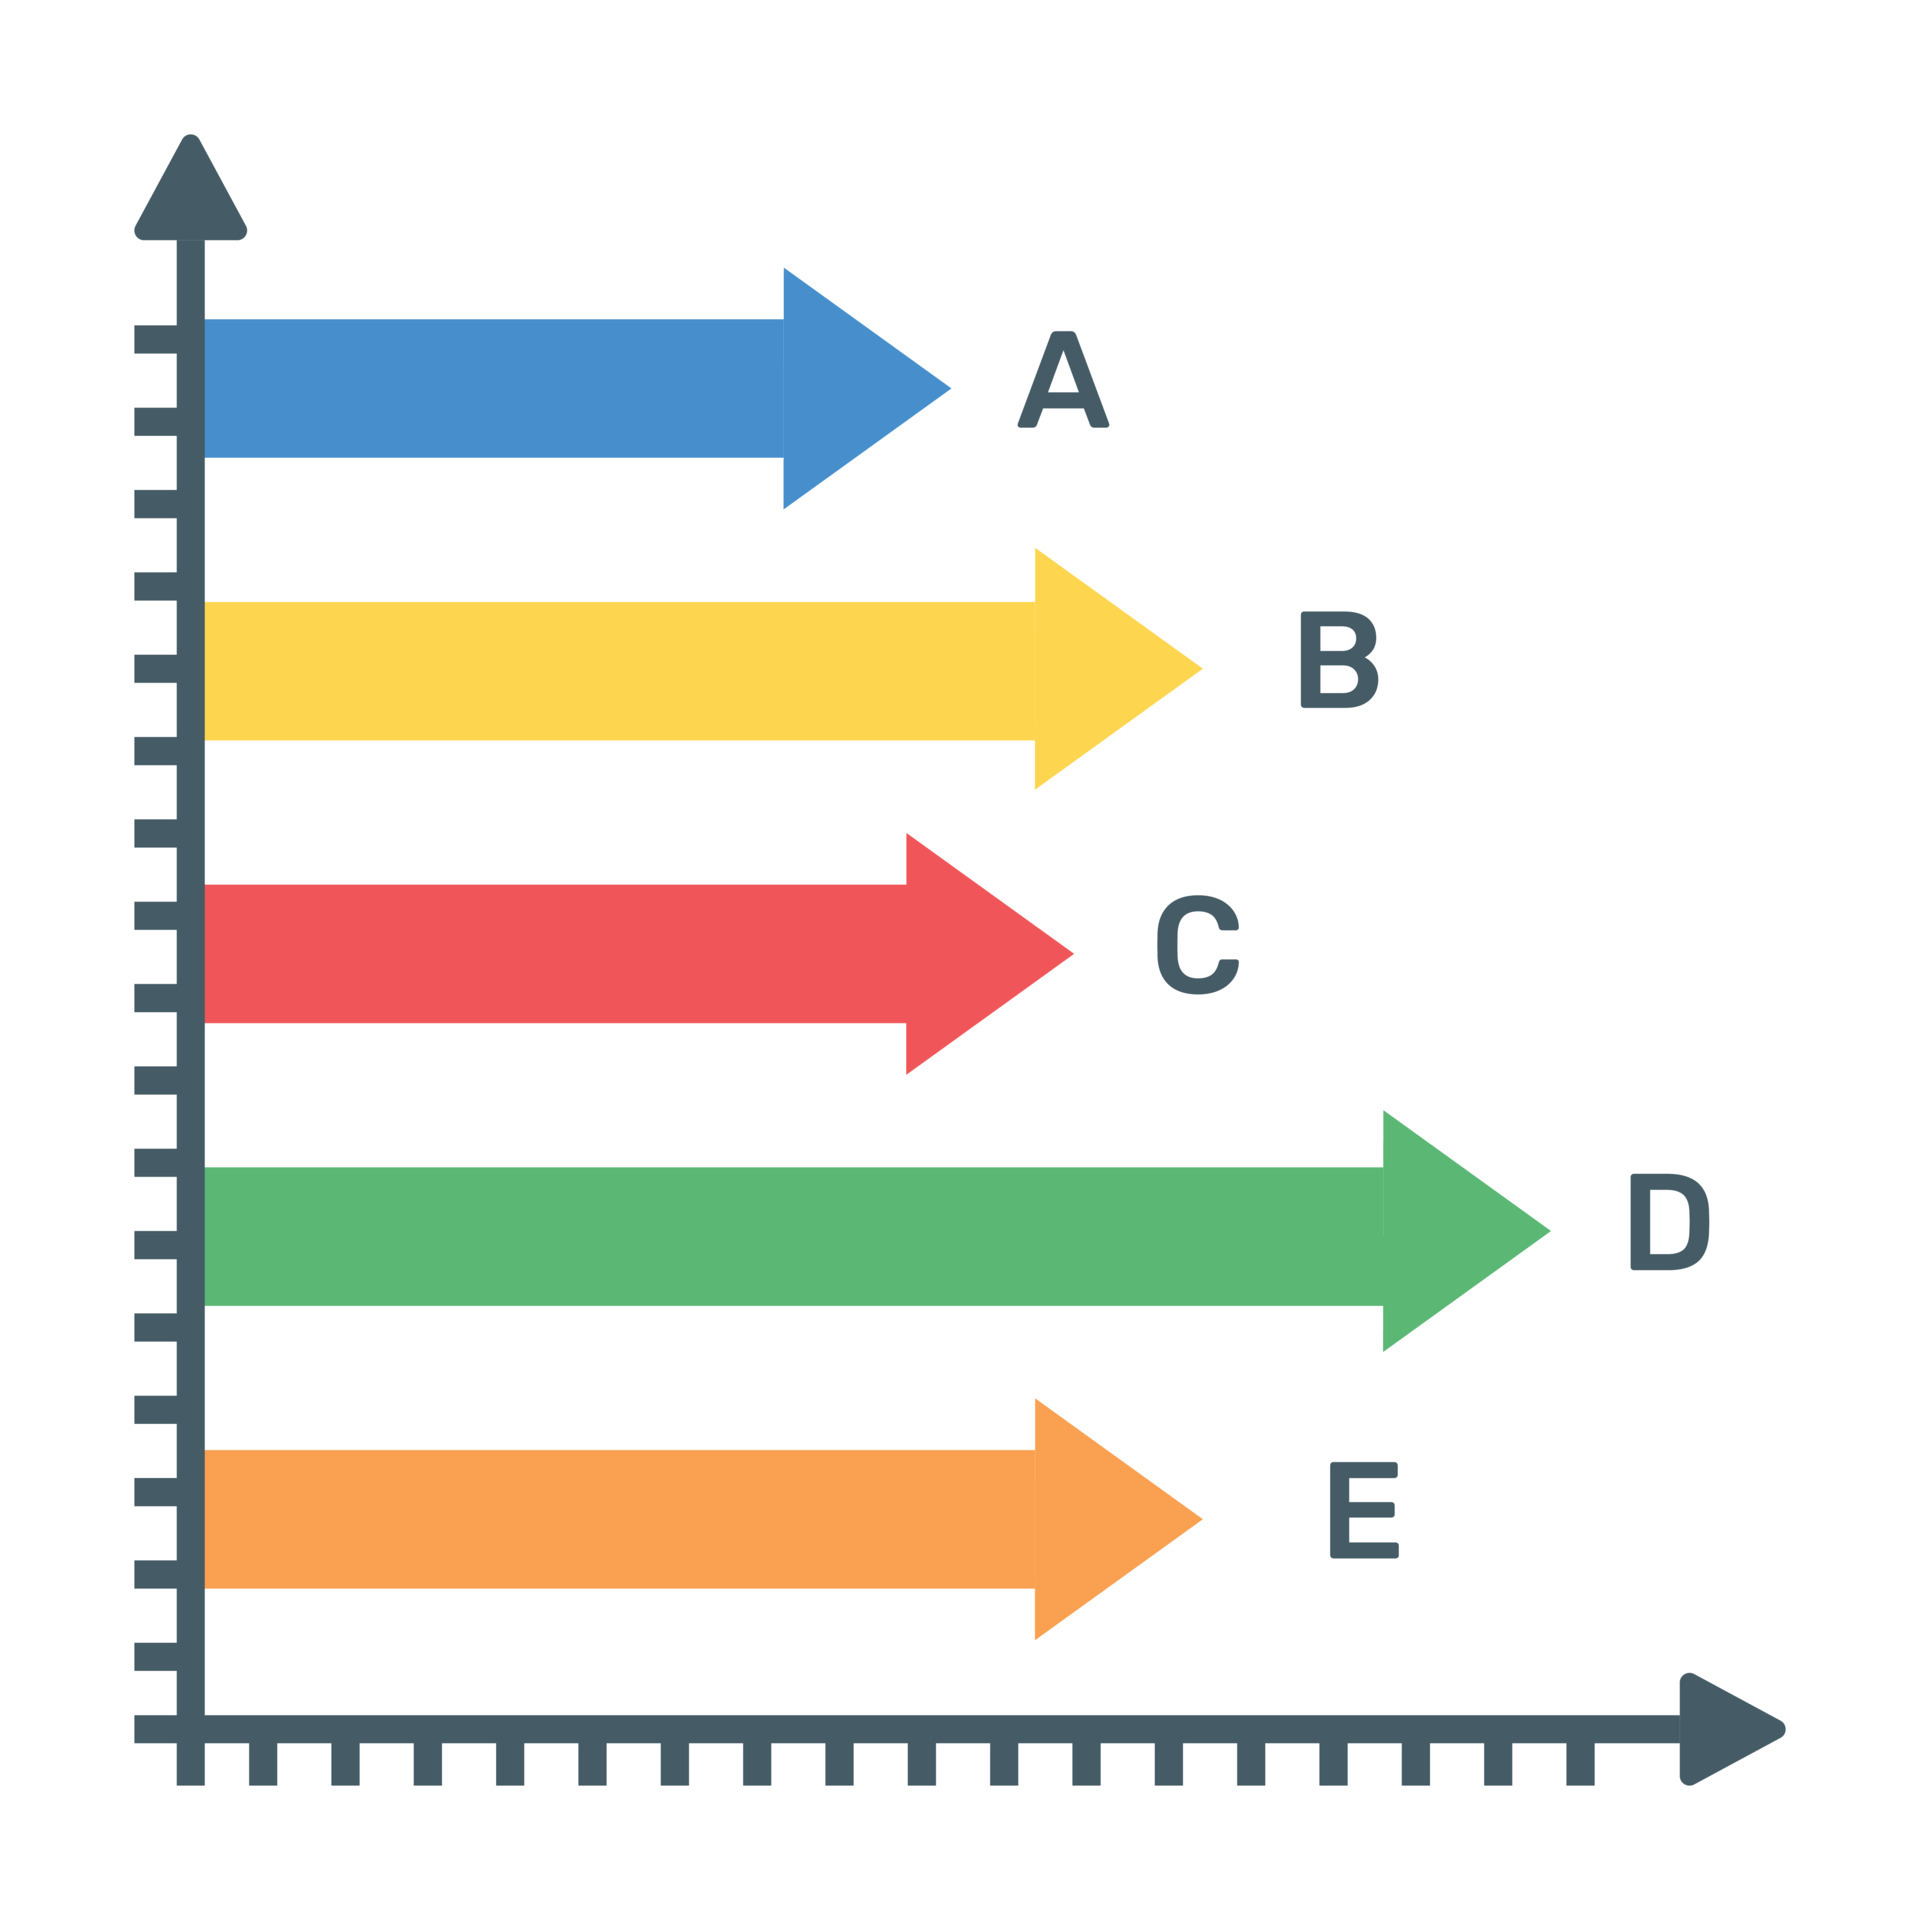 a graphical presentation that uses vertical bars